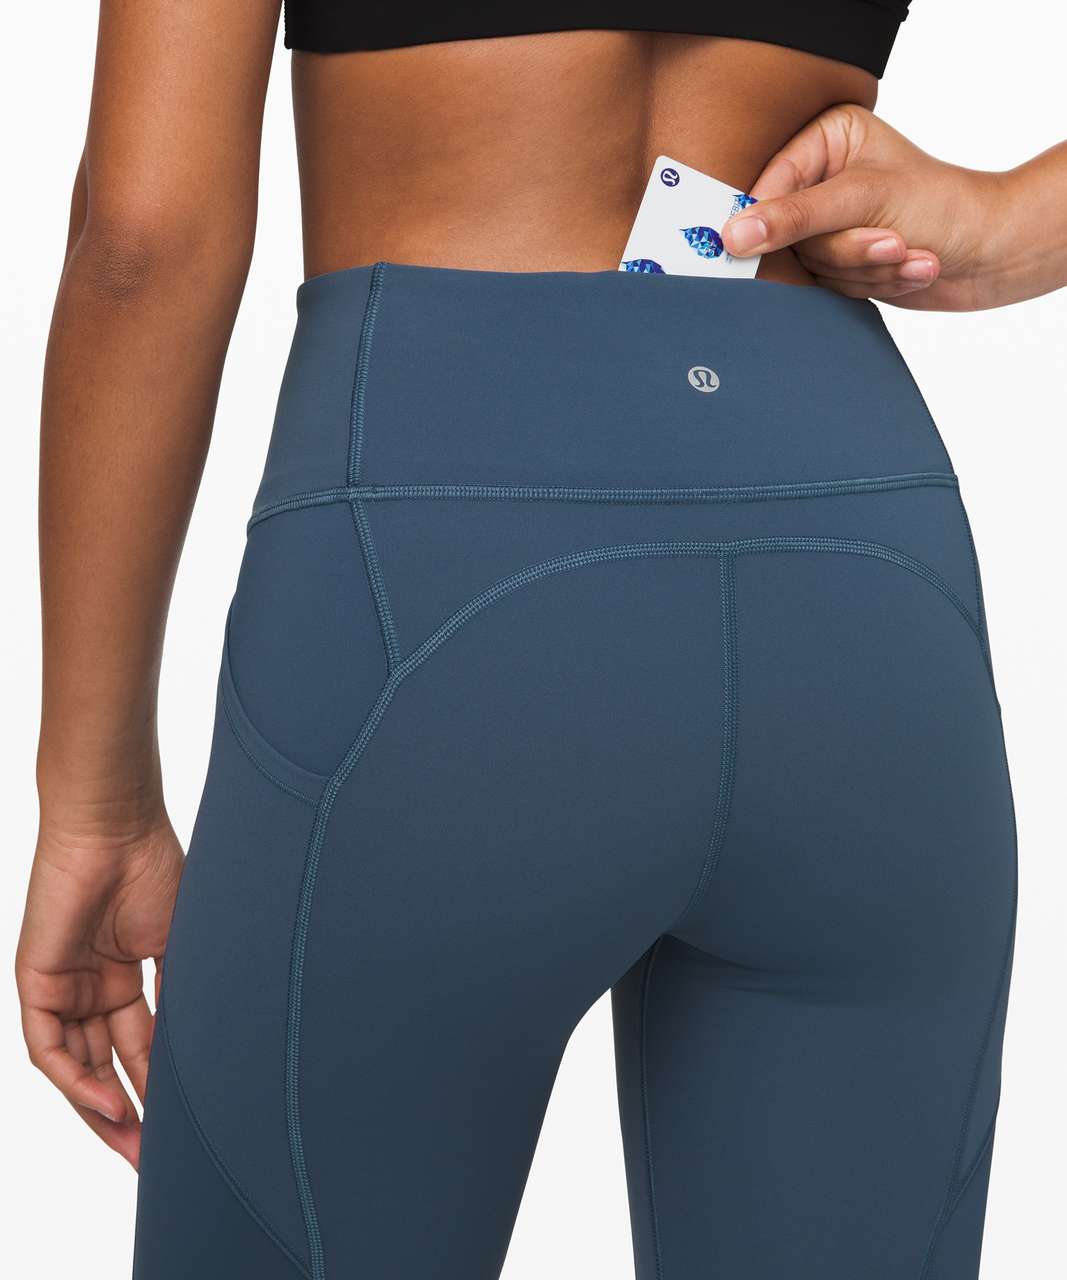 Lululemon All The Right Places Pant II 28" - Code Blue